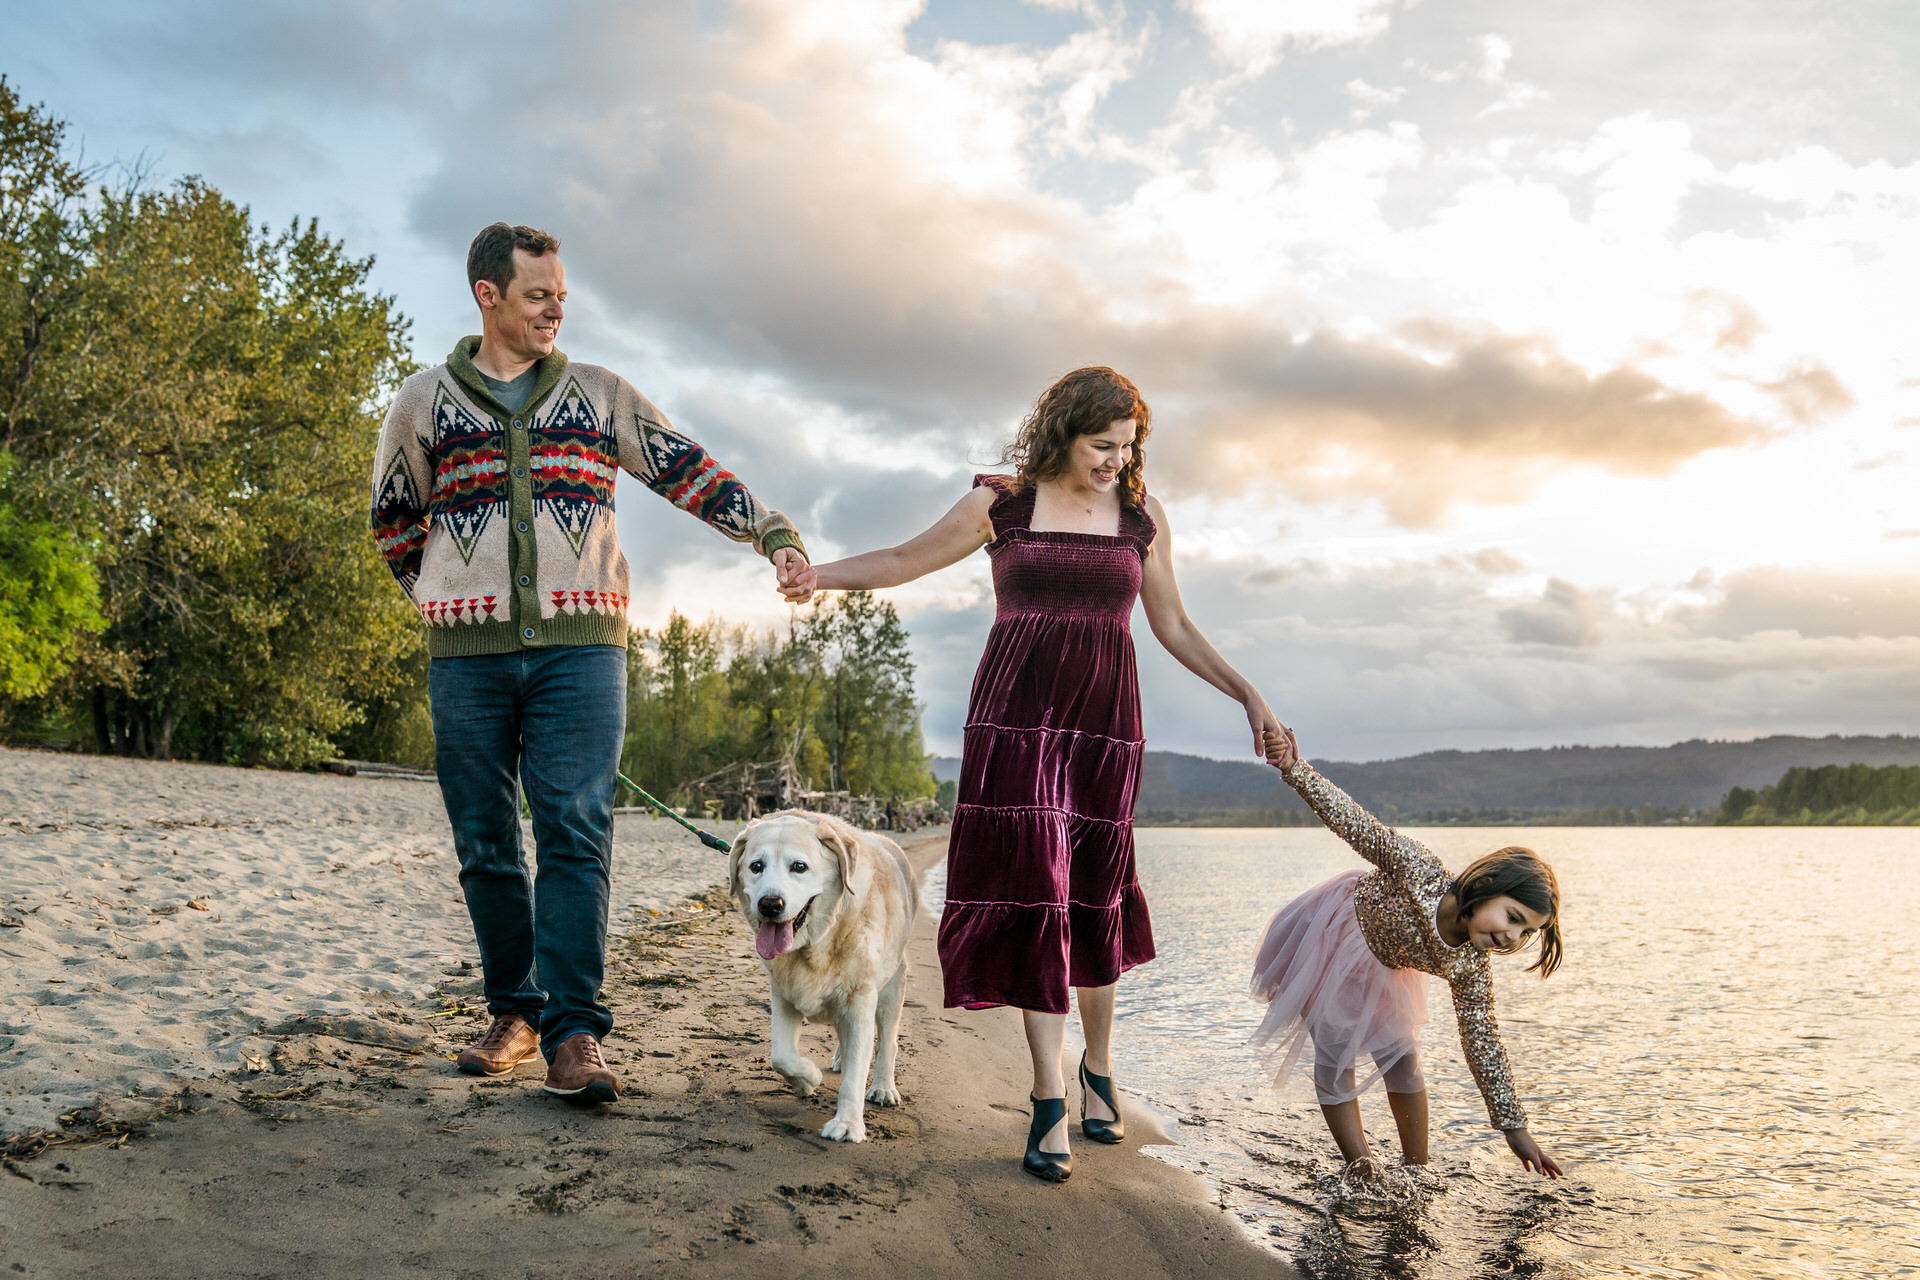 Family with dog and child walk along river beach in Portland, Oregon.